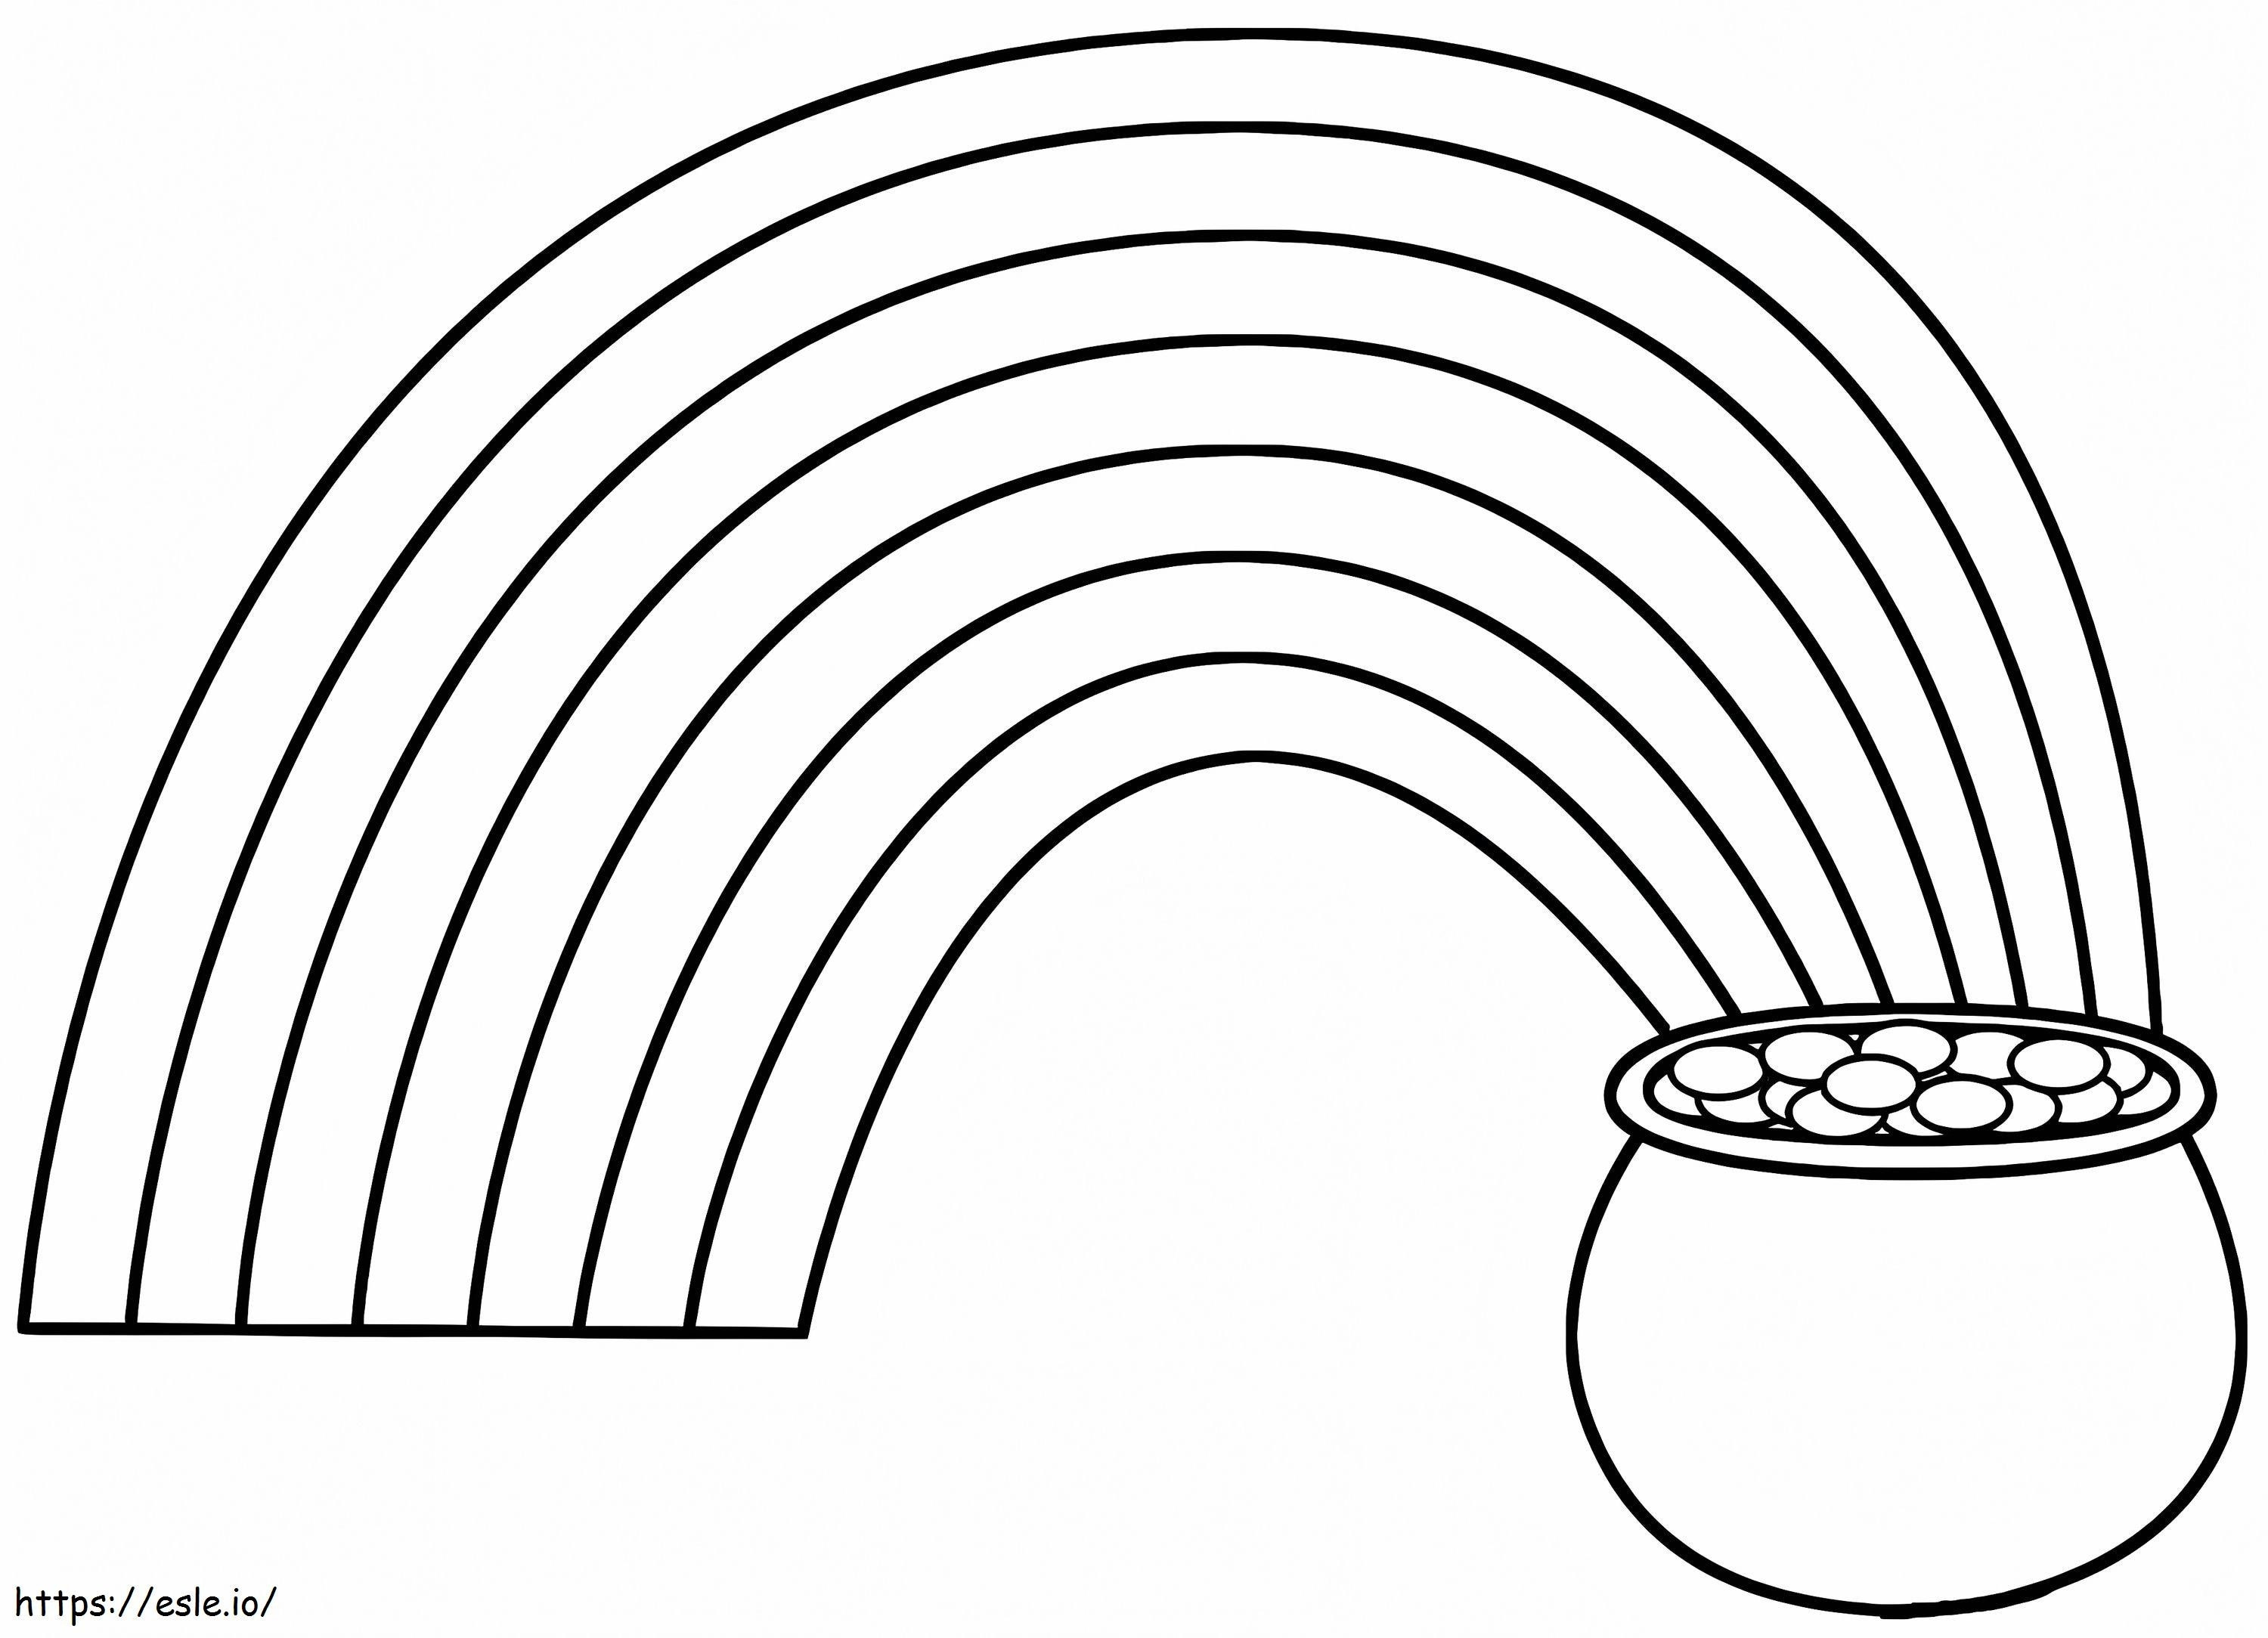 Rainbow Pot Of Gold 2 coloring page